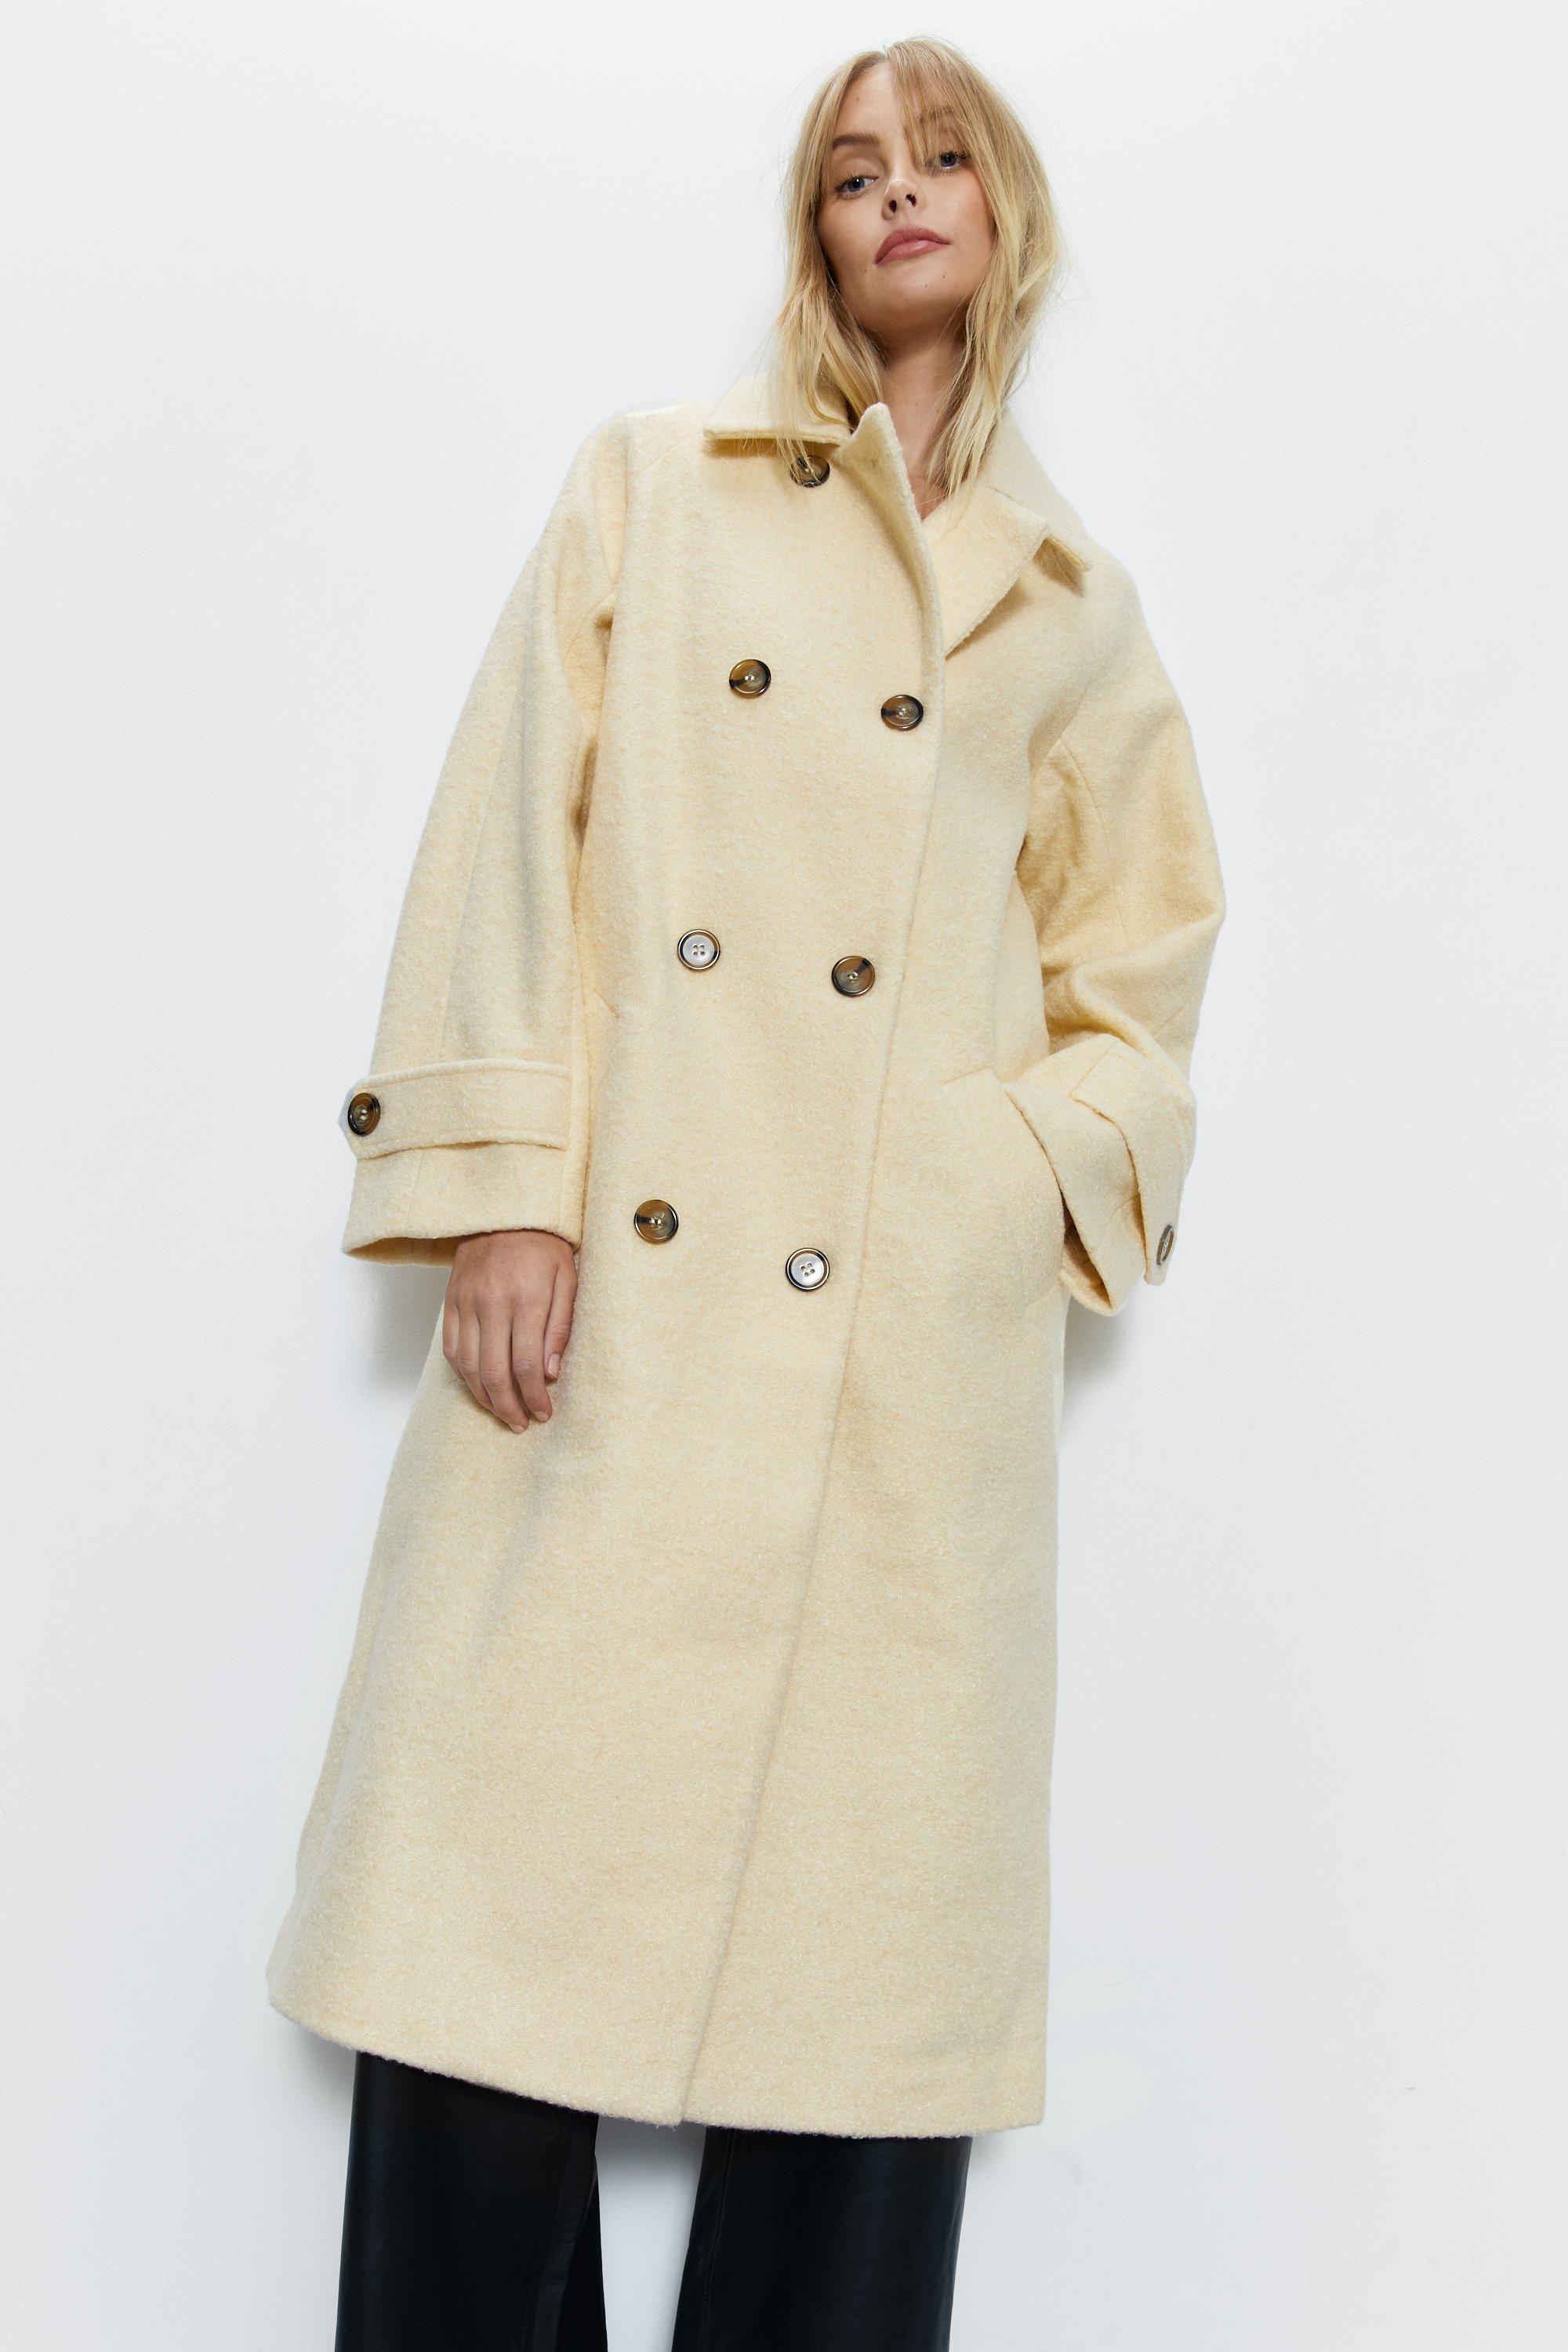 Womens Double Breasted Wool Marl Coat - butter